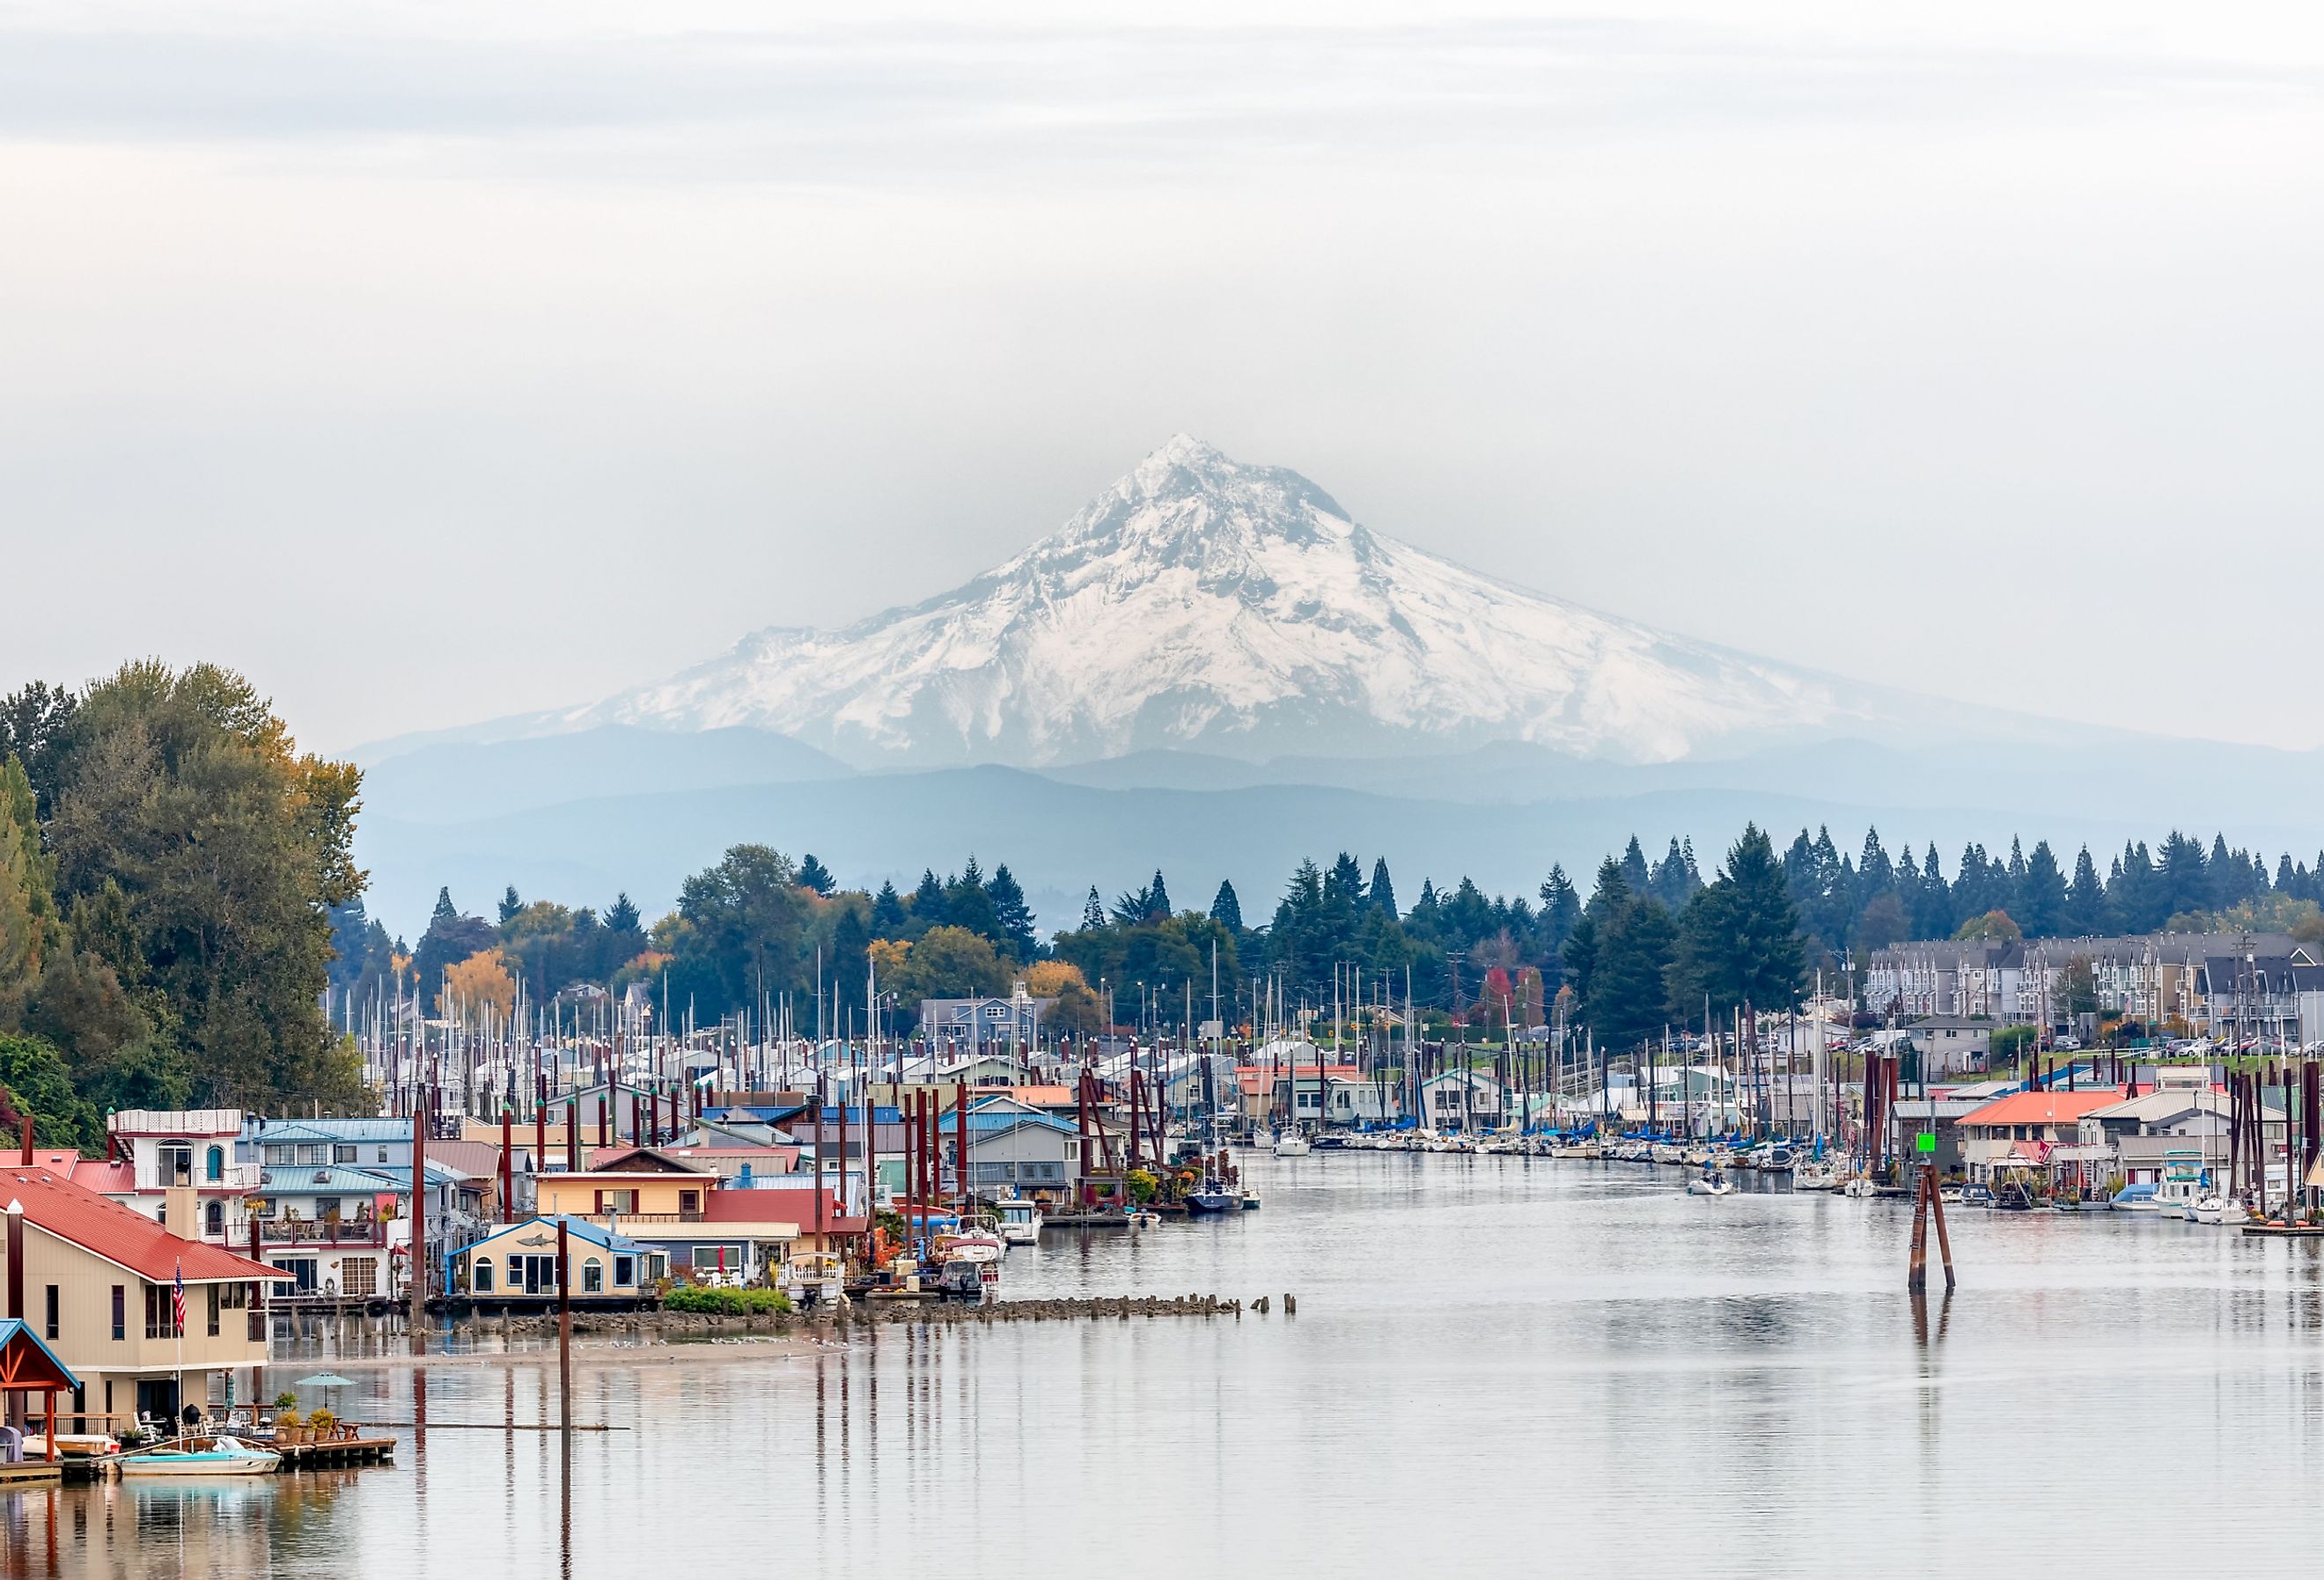 View of Mt. Hood and Portland Marina floating boat houses in Oregon. Image credit Paula Cobleigh via Shutterstock.